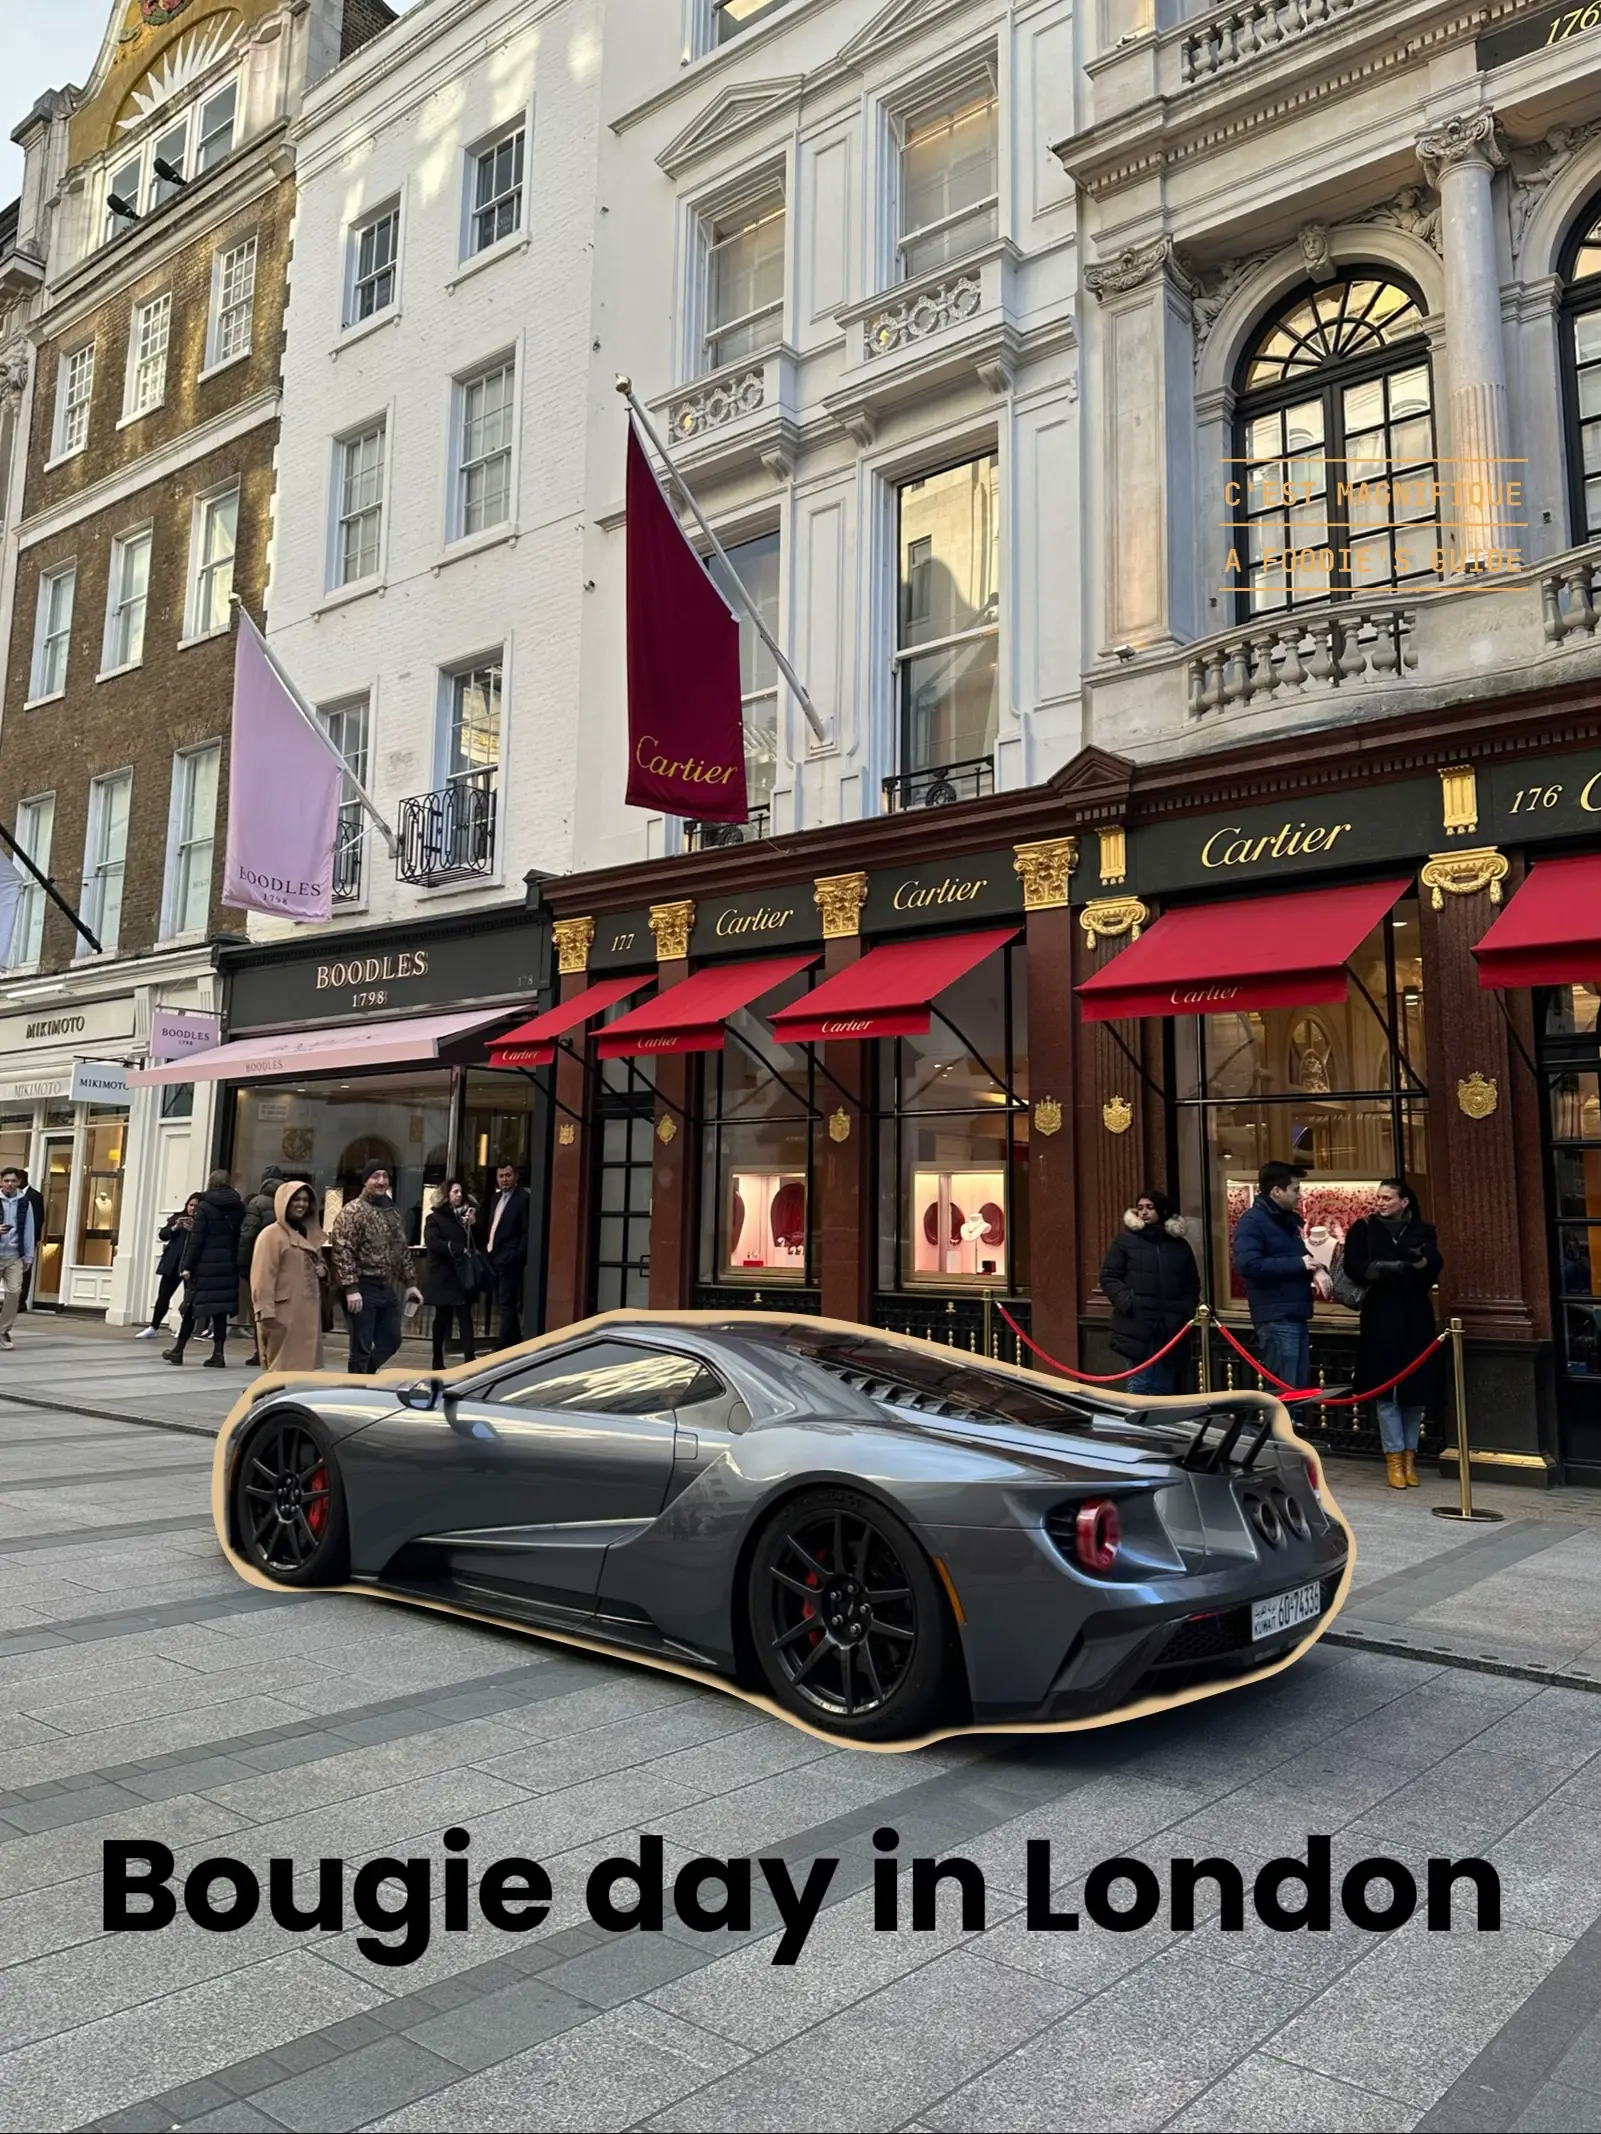 Bougie day in London - Itinerary  Gallery posted by Rachel Rae